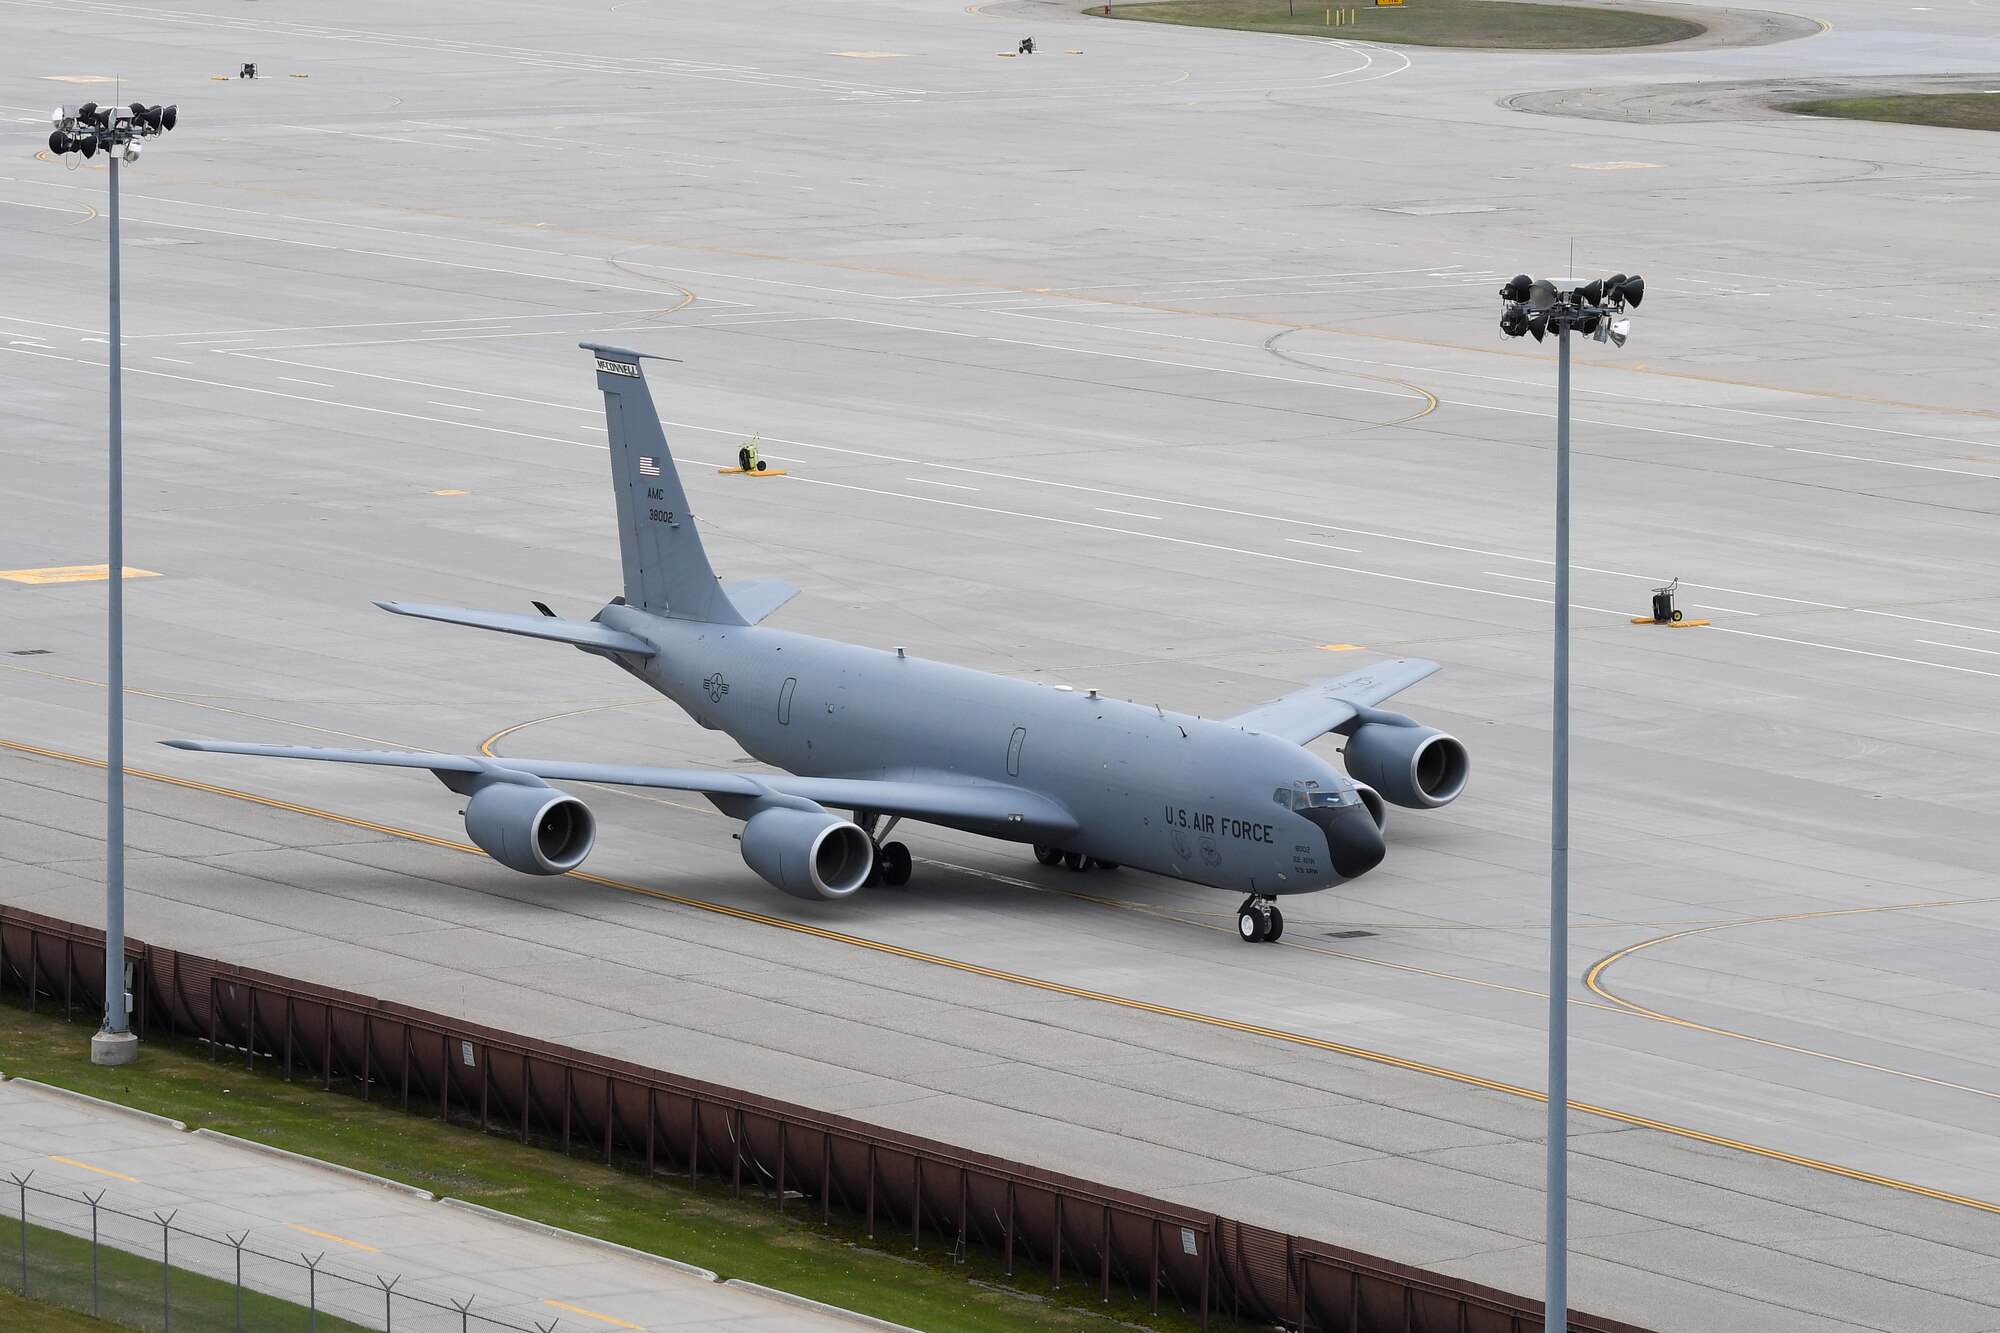 A KC-135 Stratotanker, assigned to the 22nd Air Refueling Wing, nears the parking ramp May 6, 2019, on Grand Forks Air Force Base, North Dakota. Airmen with the 319th Operations Squadron, 319th Logistics Readiness Squadron and 69th Maintenance Squadron worked together in anticipation of the temporary housing of several KC-135’s, due to inclement weather near McConnell AFB, Kansas. (U.S. Air Force photo by Senior Airman Elora J. Martinez)